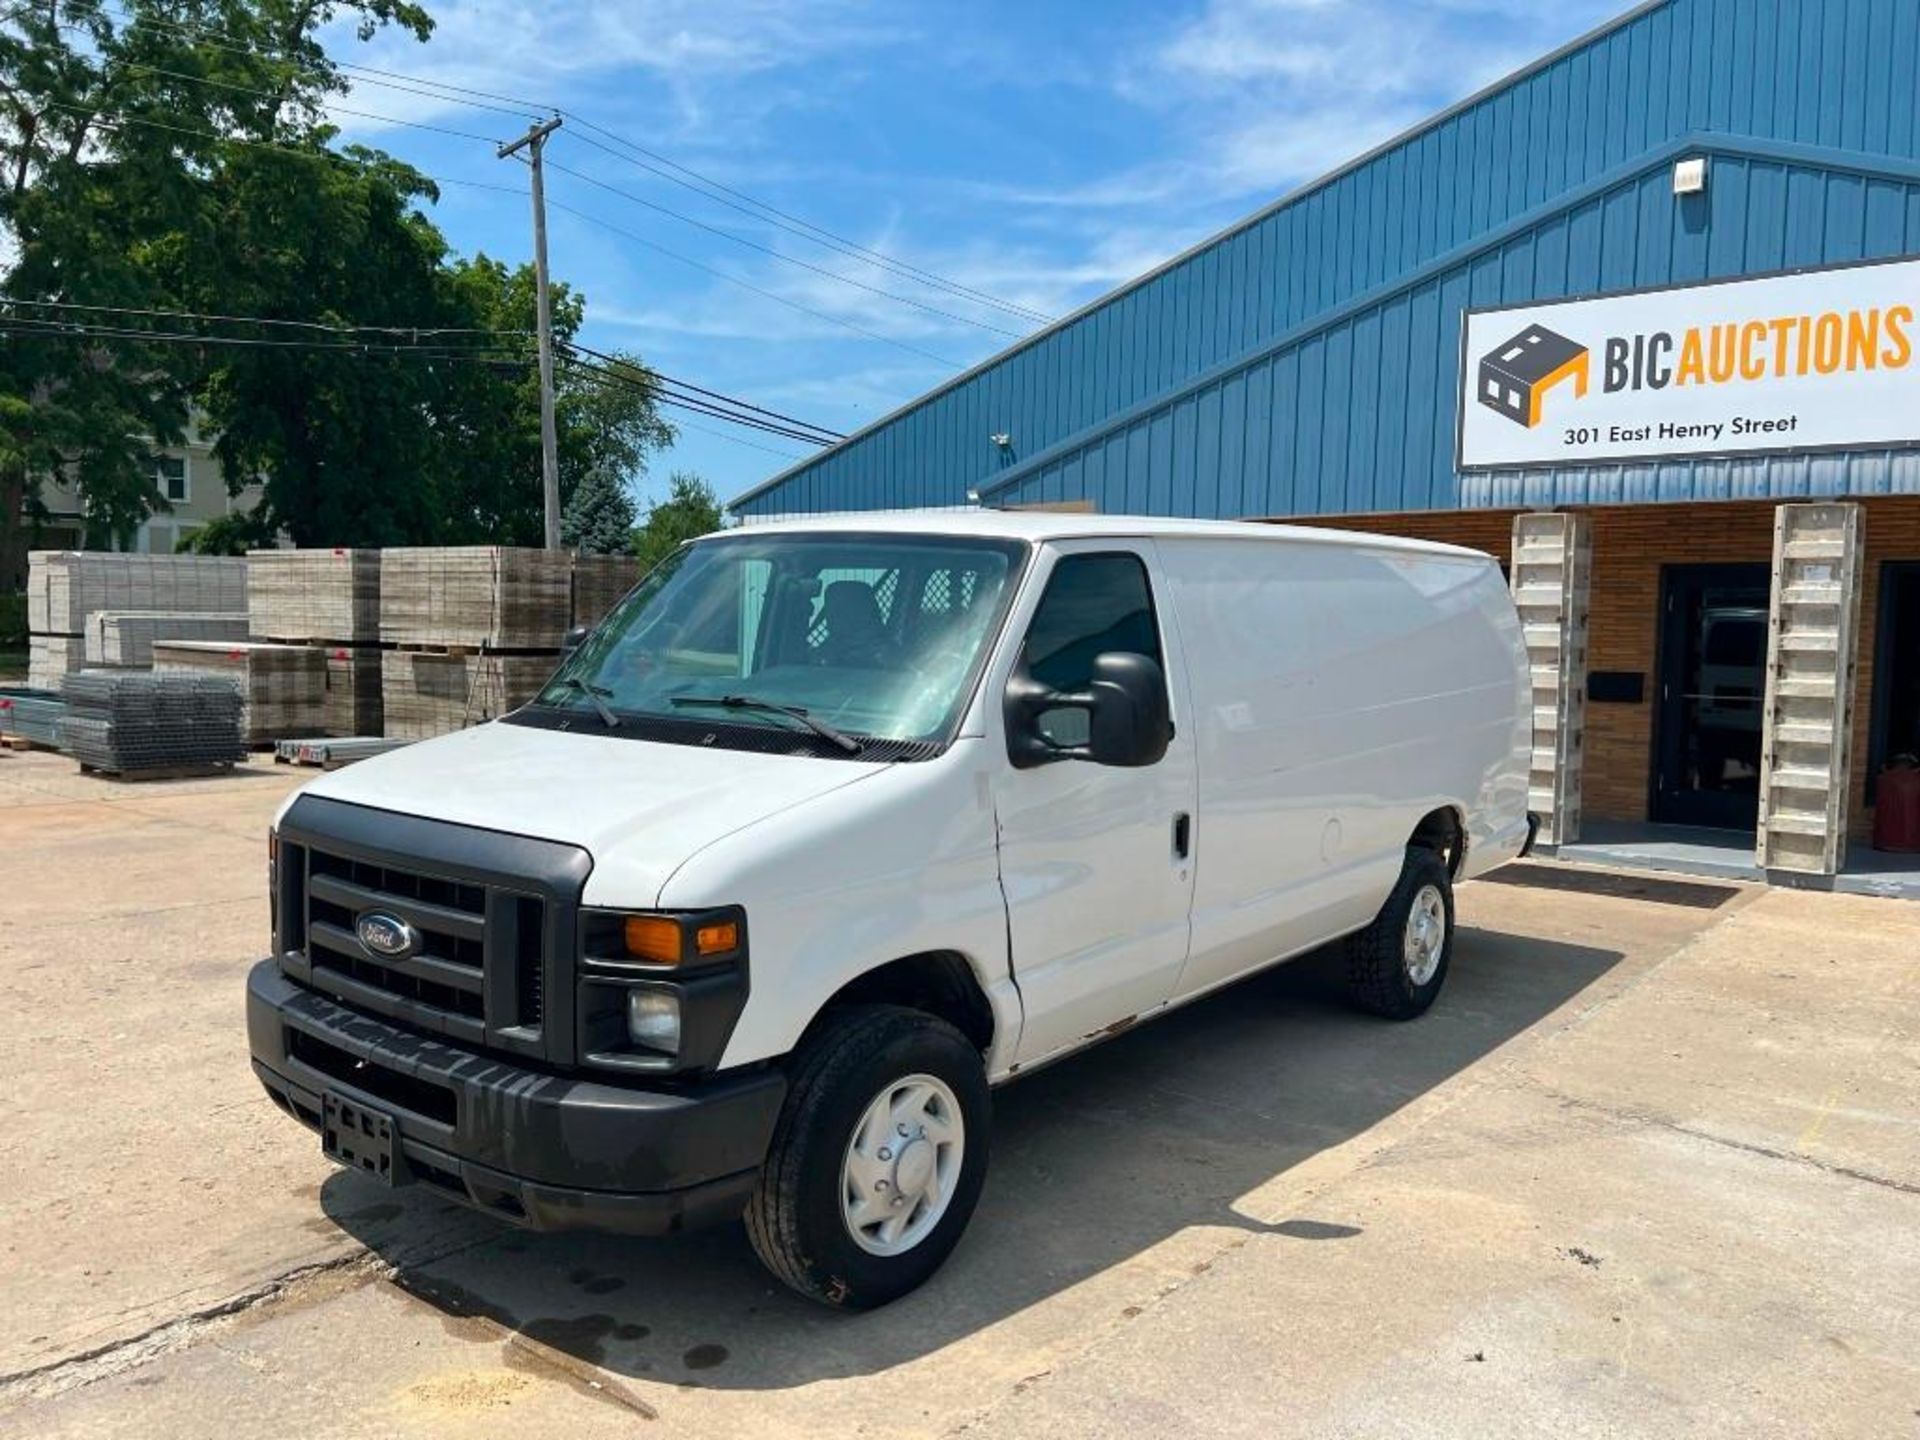 2012 Ford E250 cargo van, automatic transmission, miles: 226K, VIN: 1FTNS2EL9CDA87781, located in